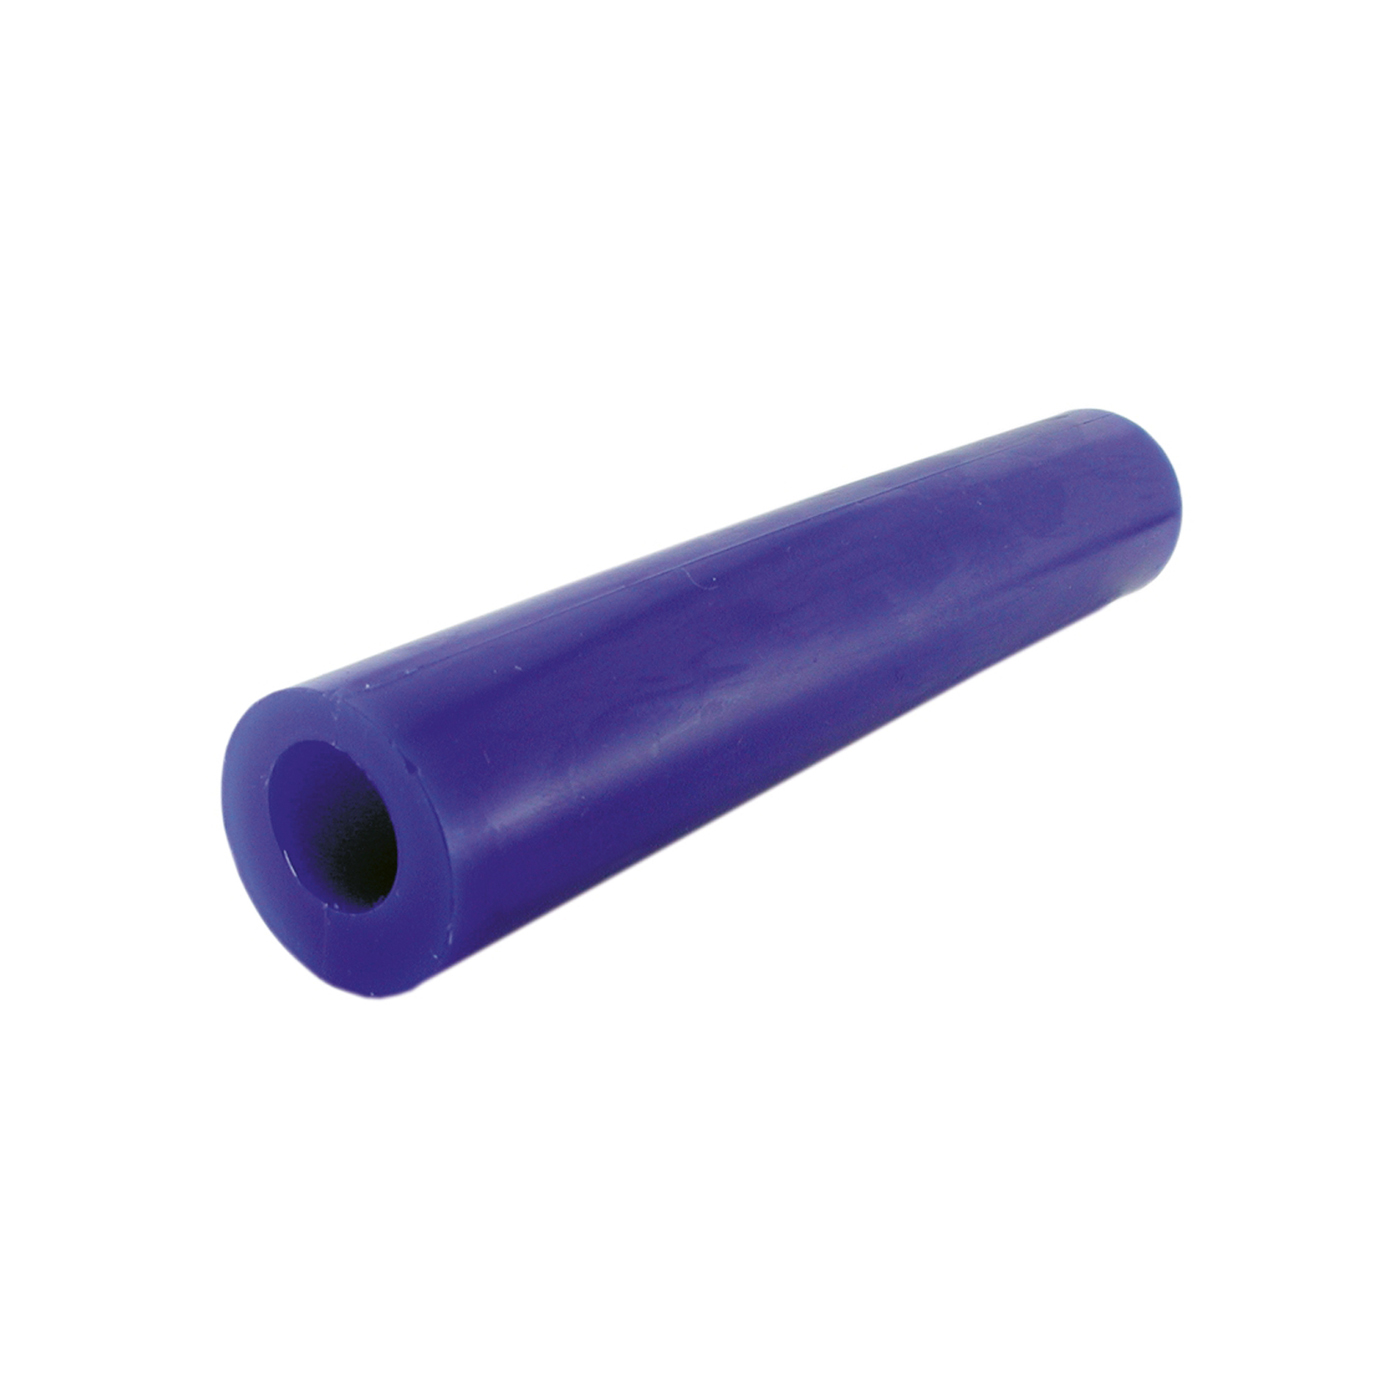 Filing/Milling Wax Round Profile, Hard, Blue, Excentr. Hole - 1 piece